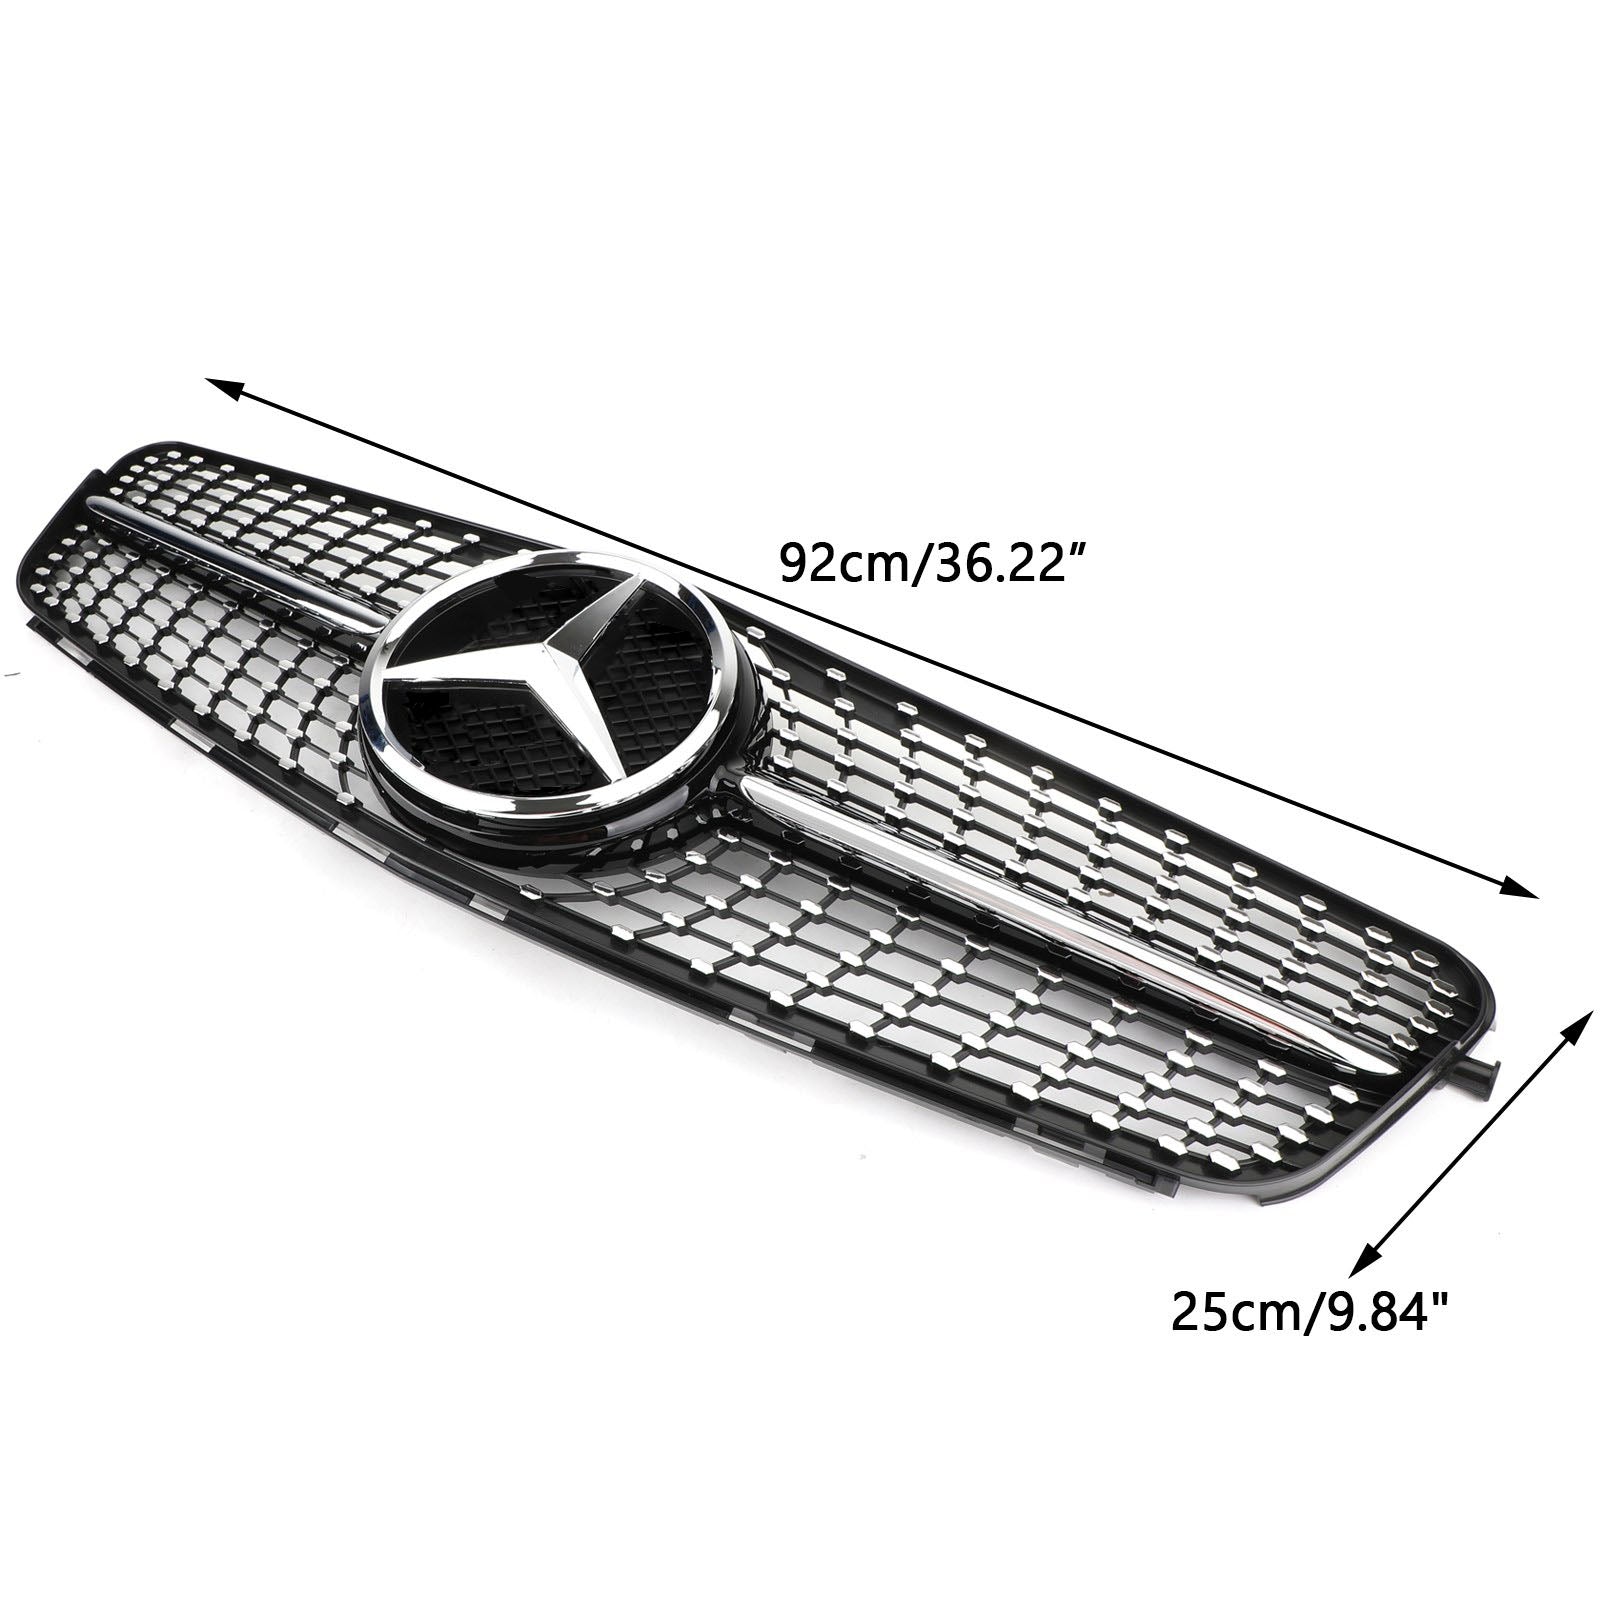 W204 C200 C300 08-14 Mercedes-Benz Diamond Black Chrome Front Grill Replacement Grille Generic